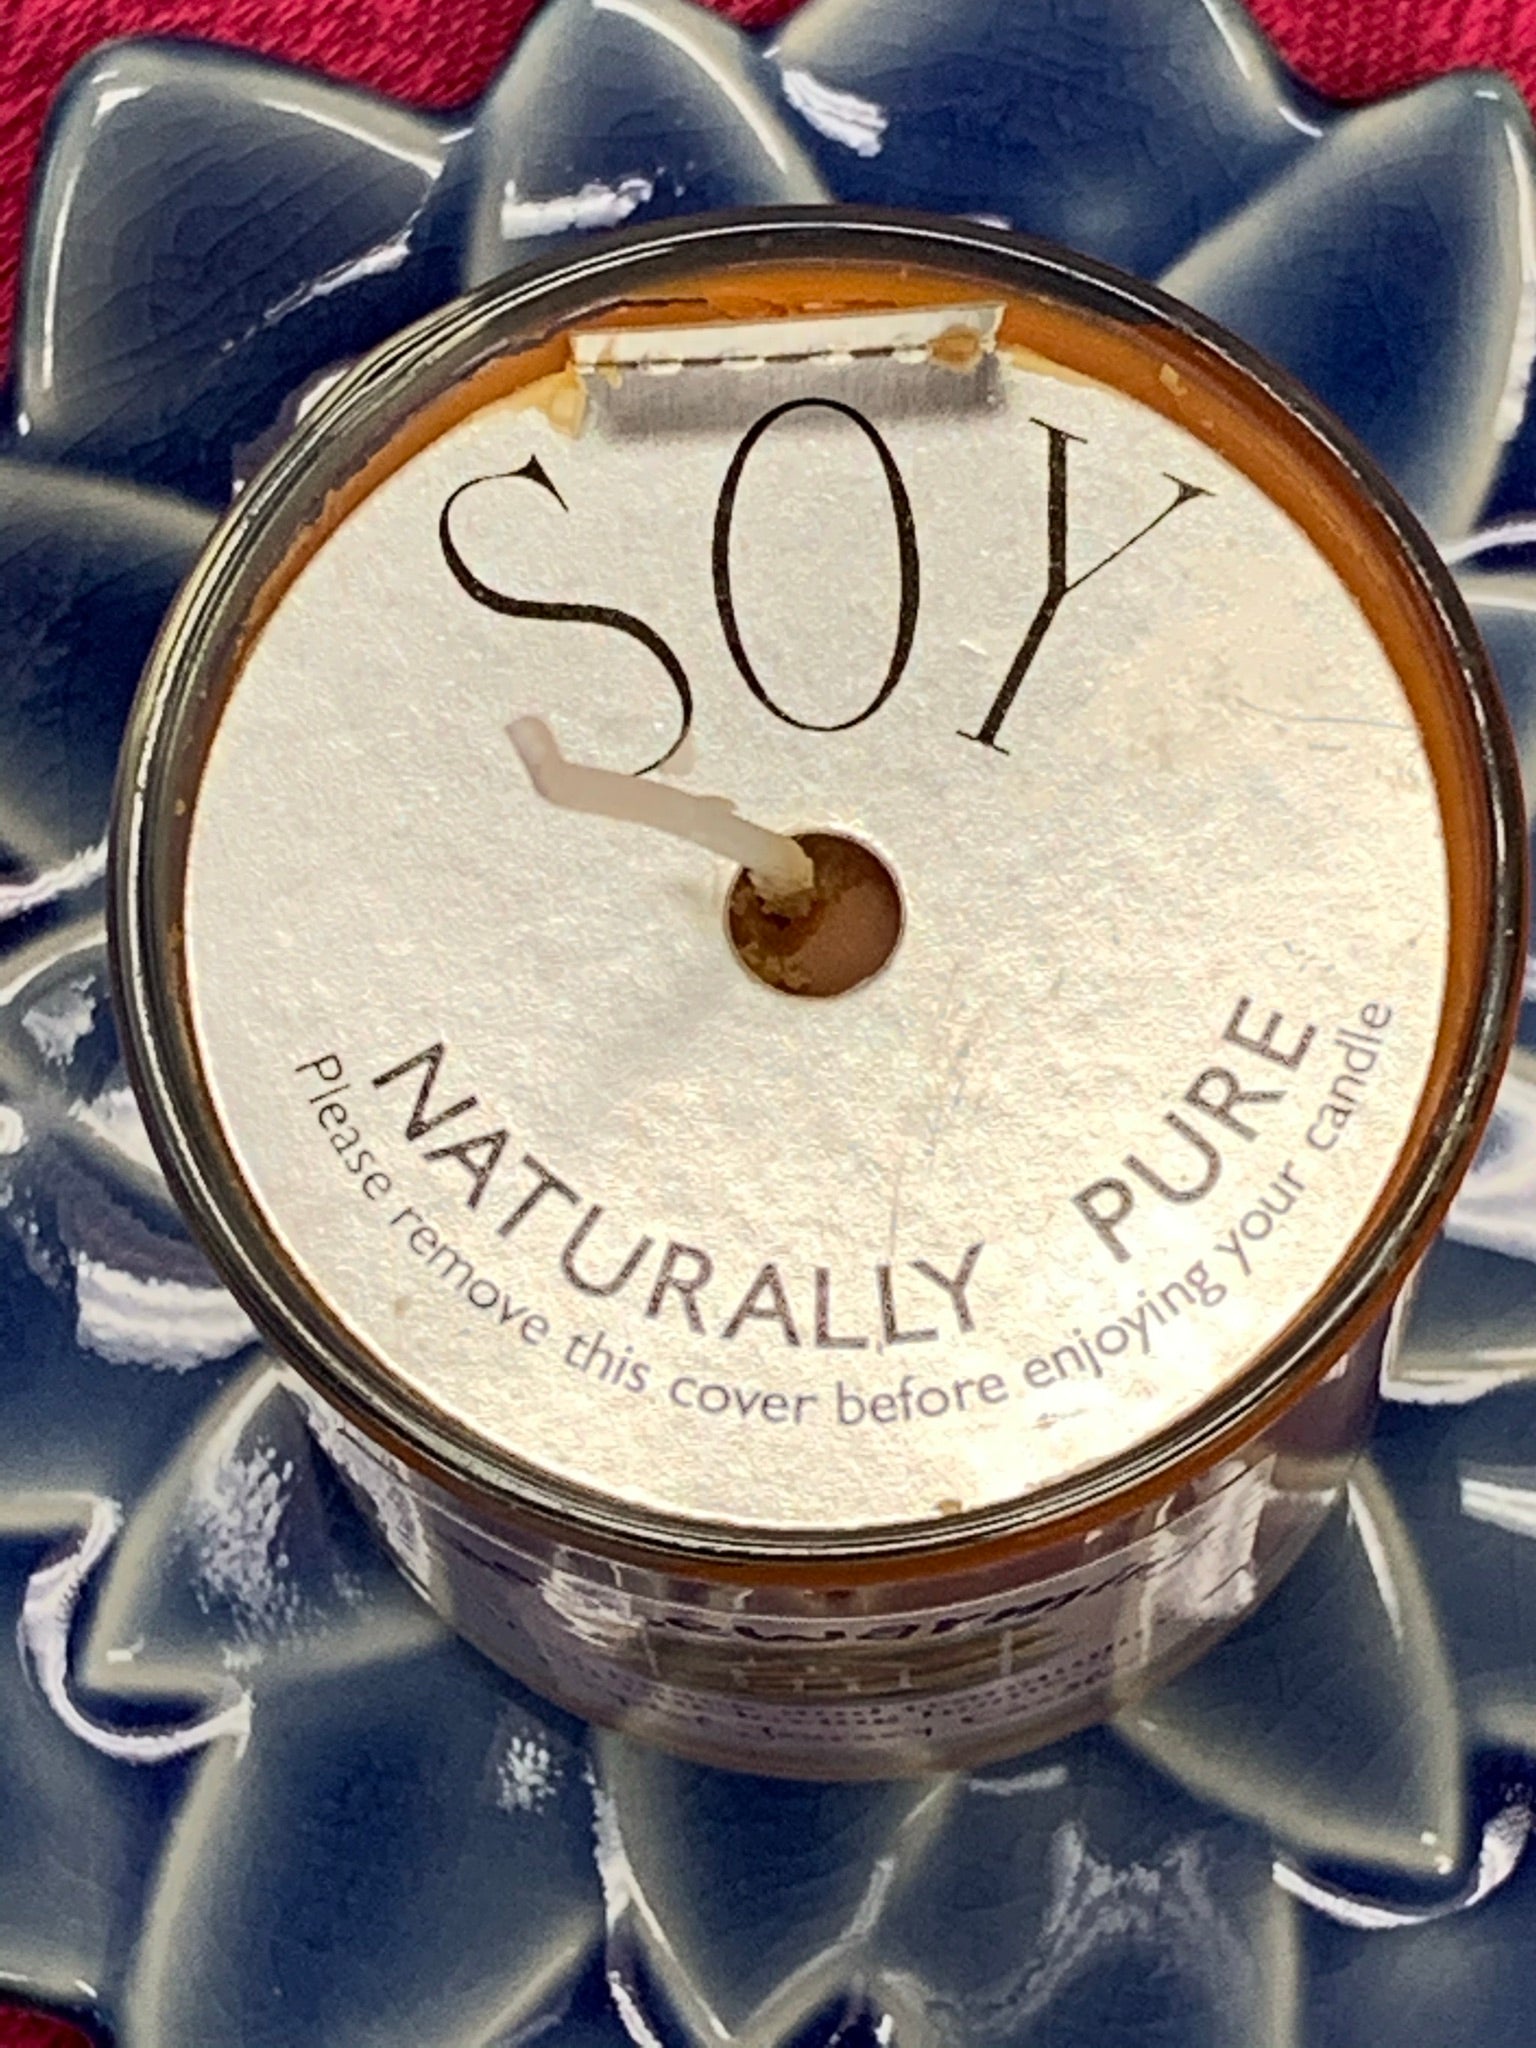 Close-up view from above the candle showing its silver-colored, paperboard, protective covering.